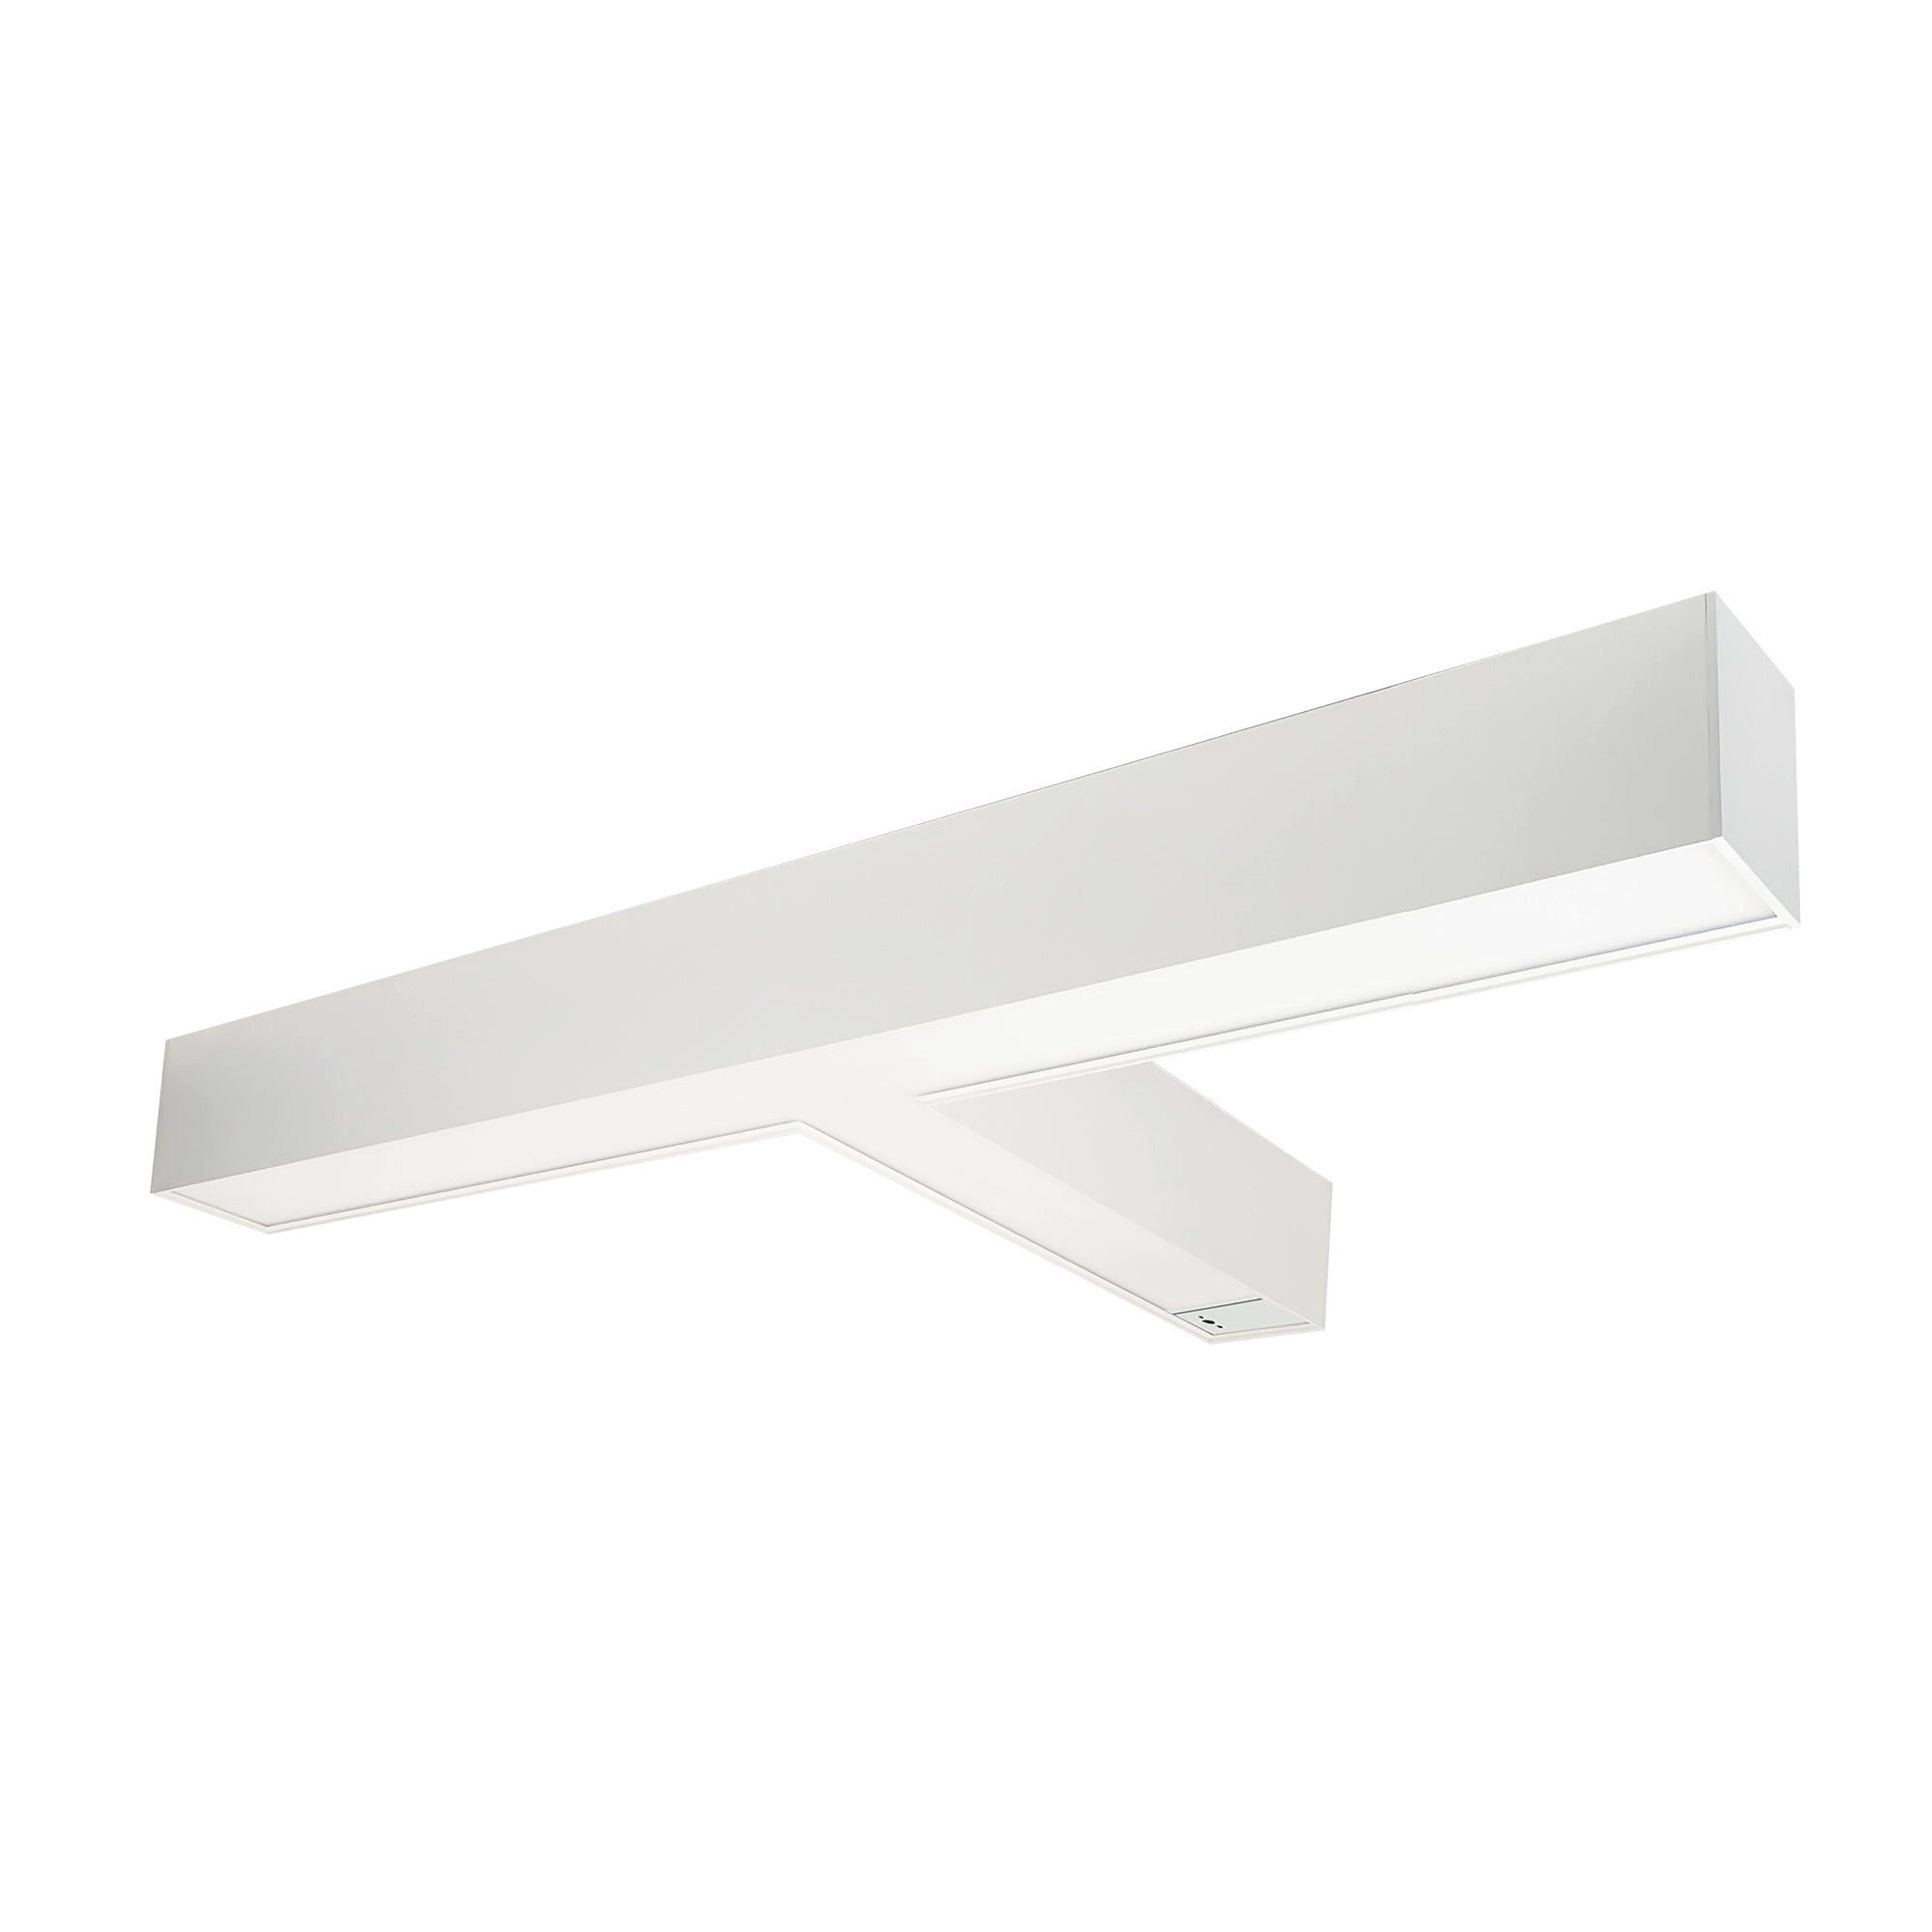 Nora Lighting NLUD-T334W/OS - Linear -  InchT Inch Shaped L-Line LED Indirect/Direct Linear, 5027lm / Selectable CCT, White Finish, with Motion Sensor